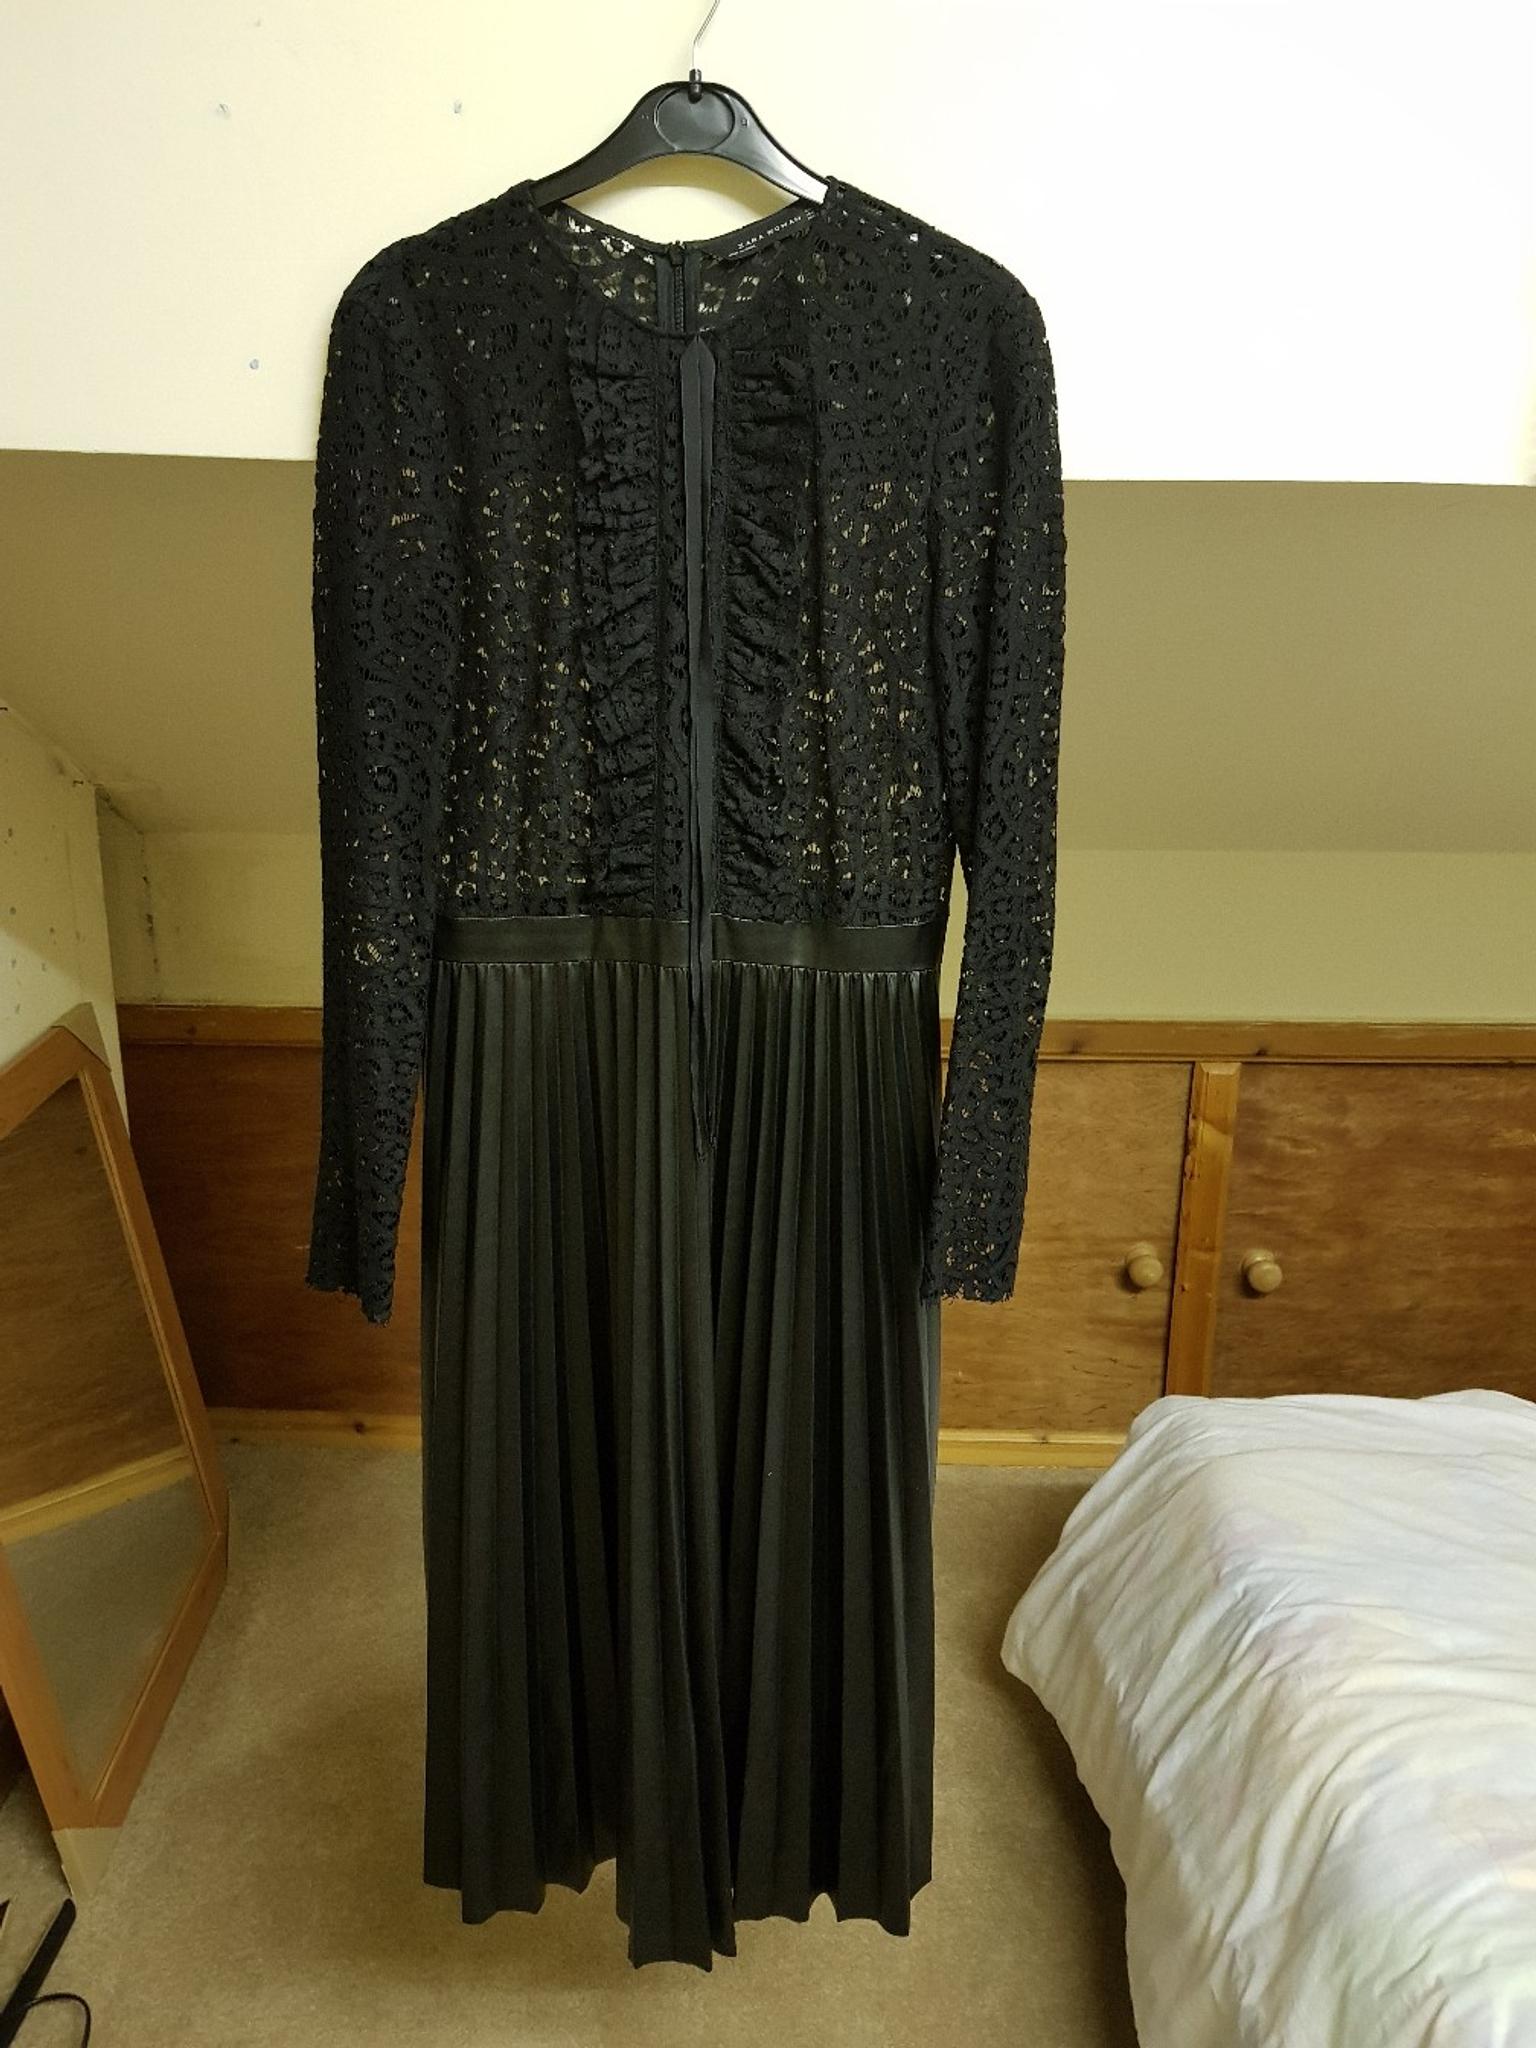 Lace dress with pleated skirt / Zara in 